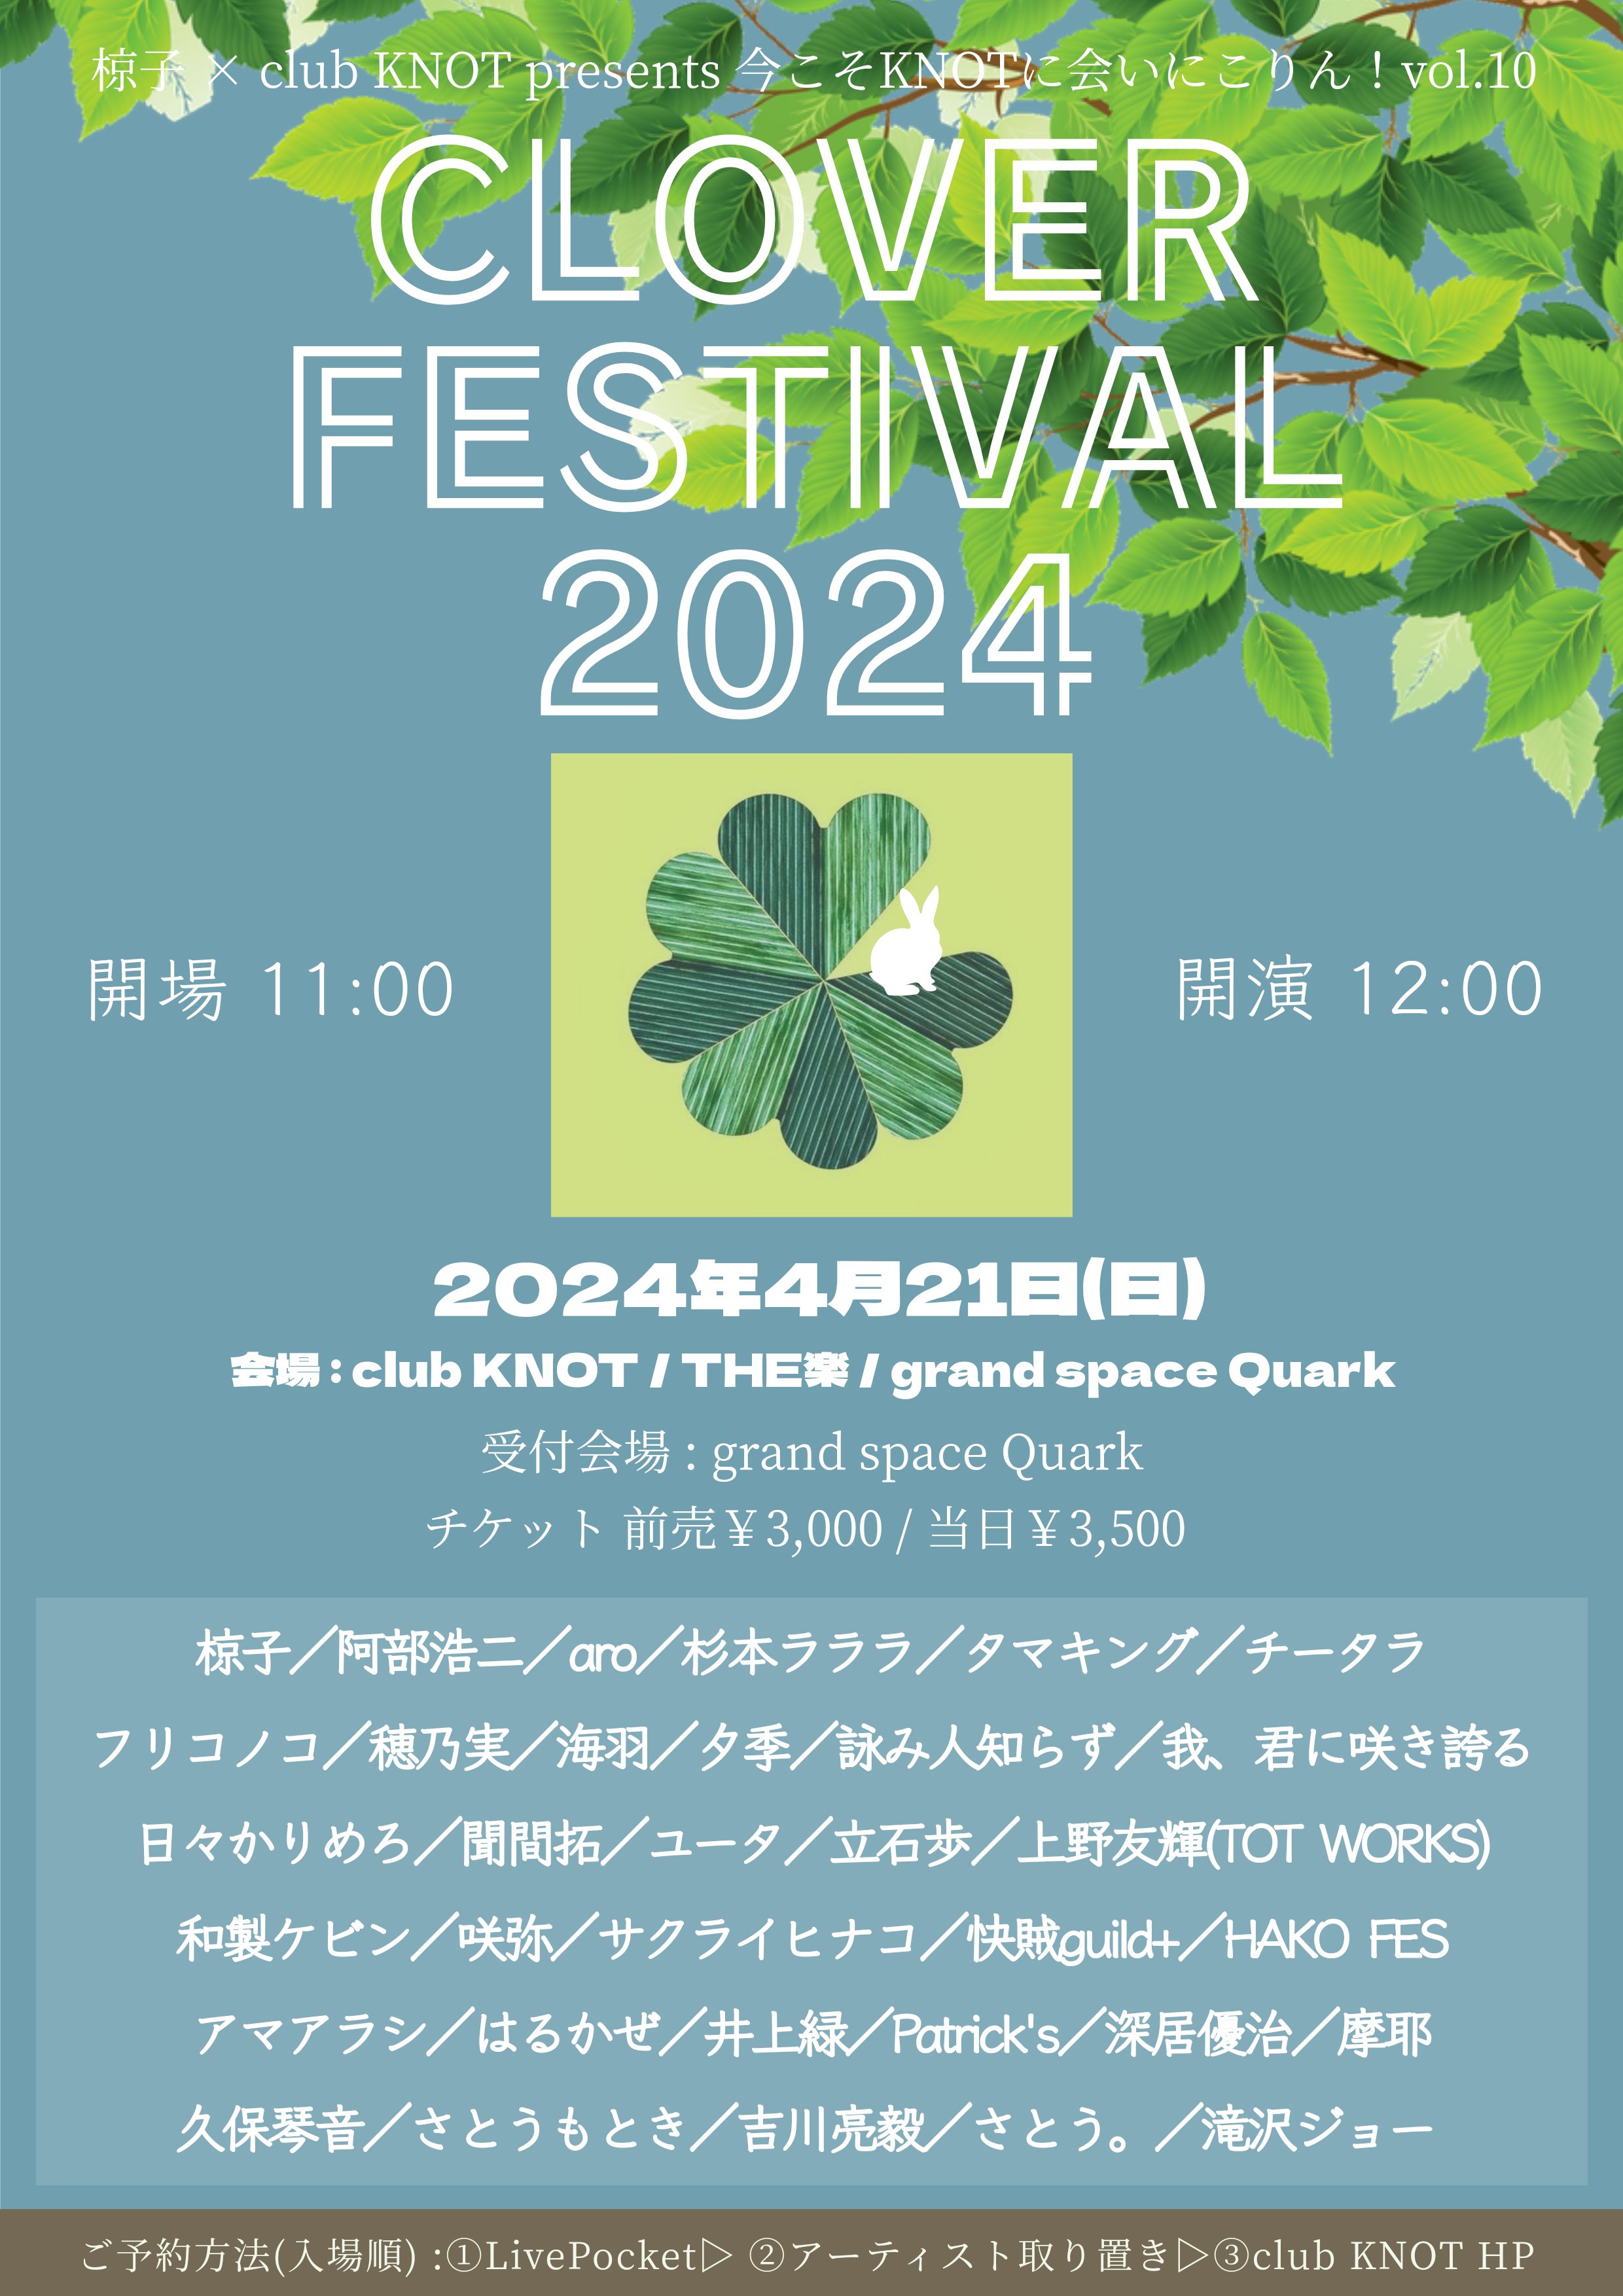 CLOVER FESTIVAL 2024 椋子 × club KNOT presents 『今こそKNOTに会いにこりん！』 vol.10